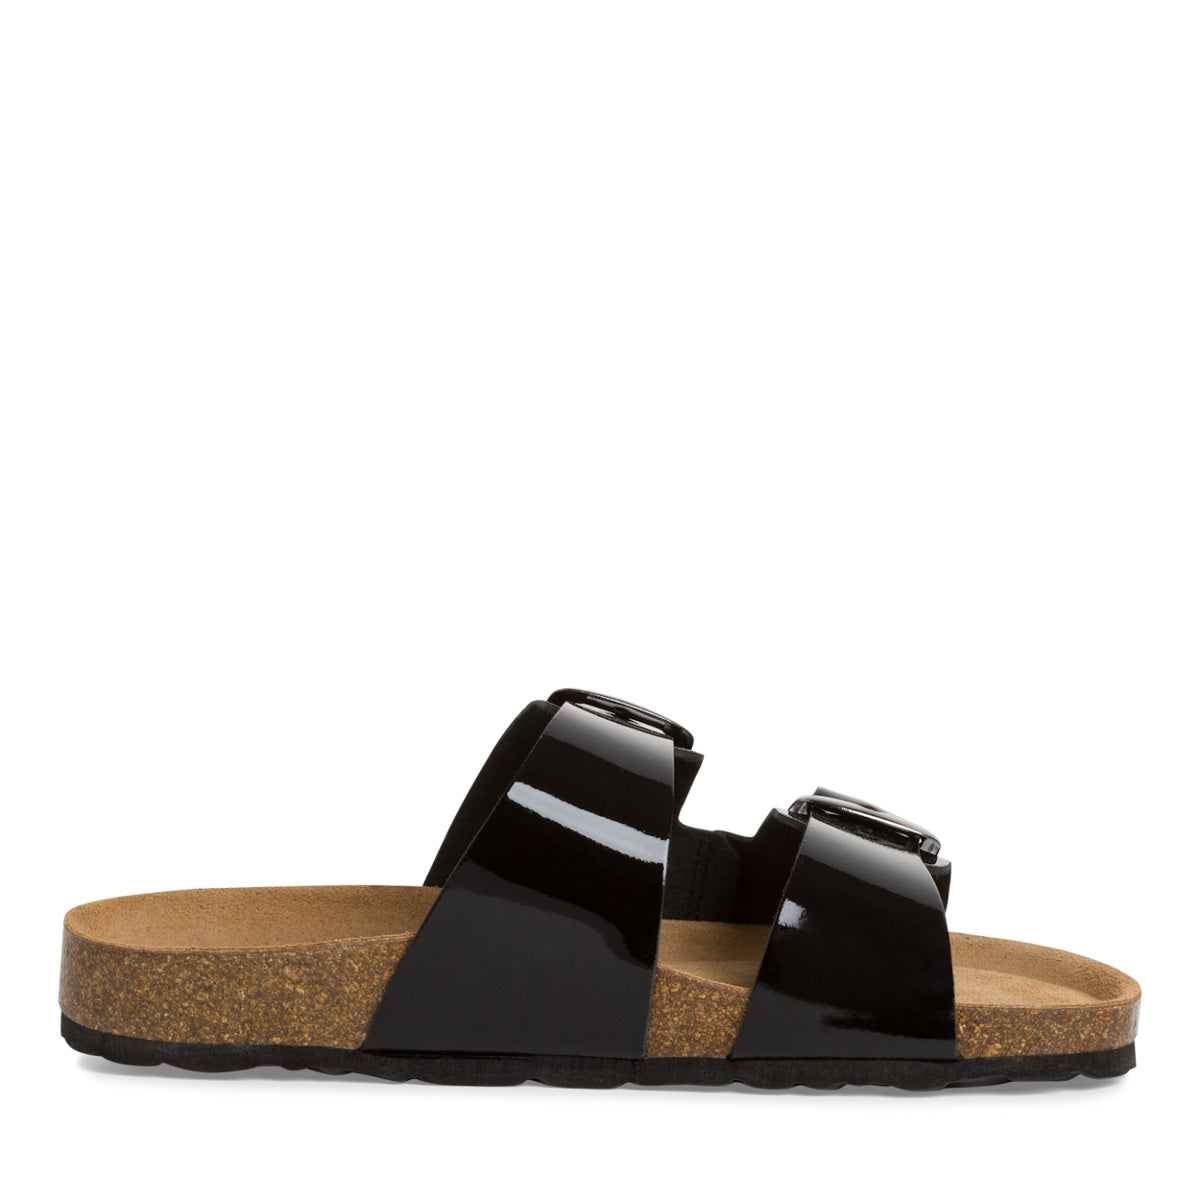 Marco Tozzi Black Patent Leather Sandal with Buckle Detail